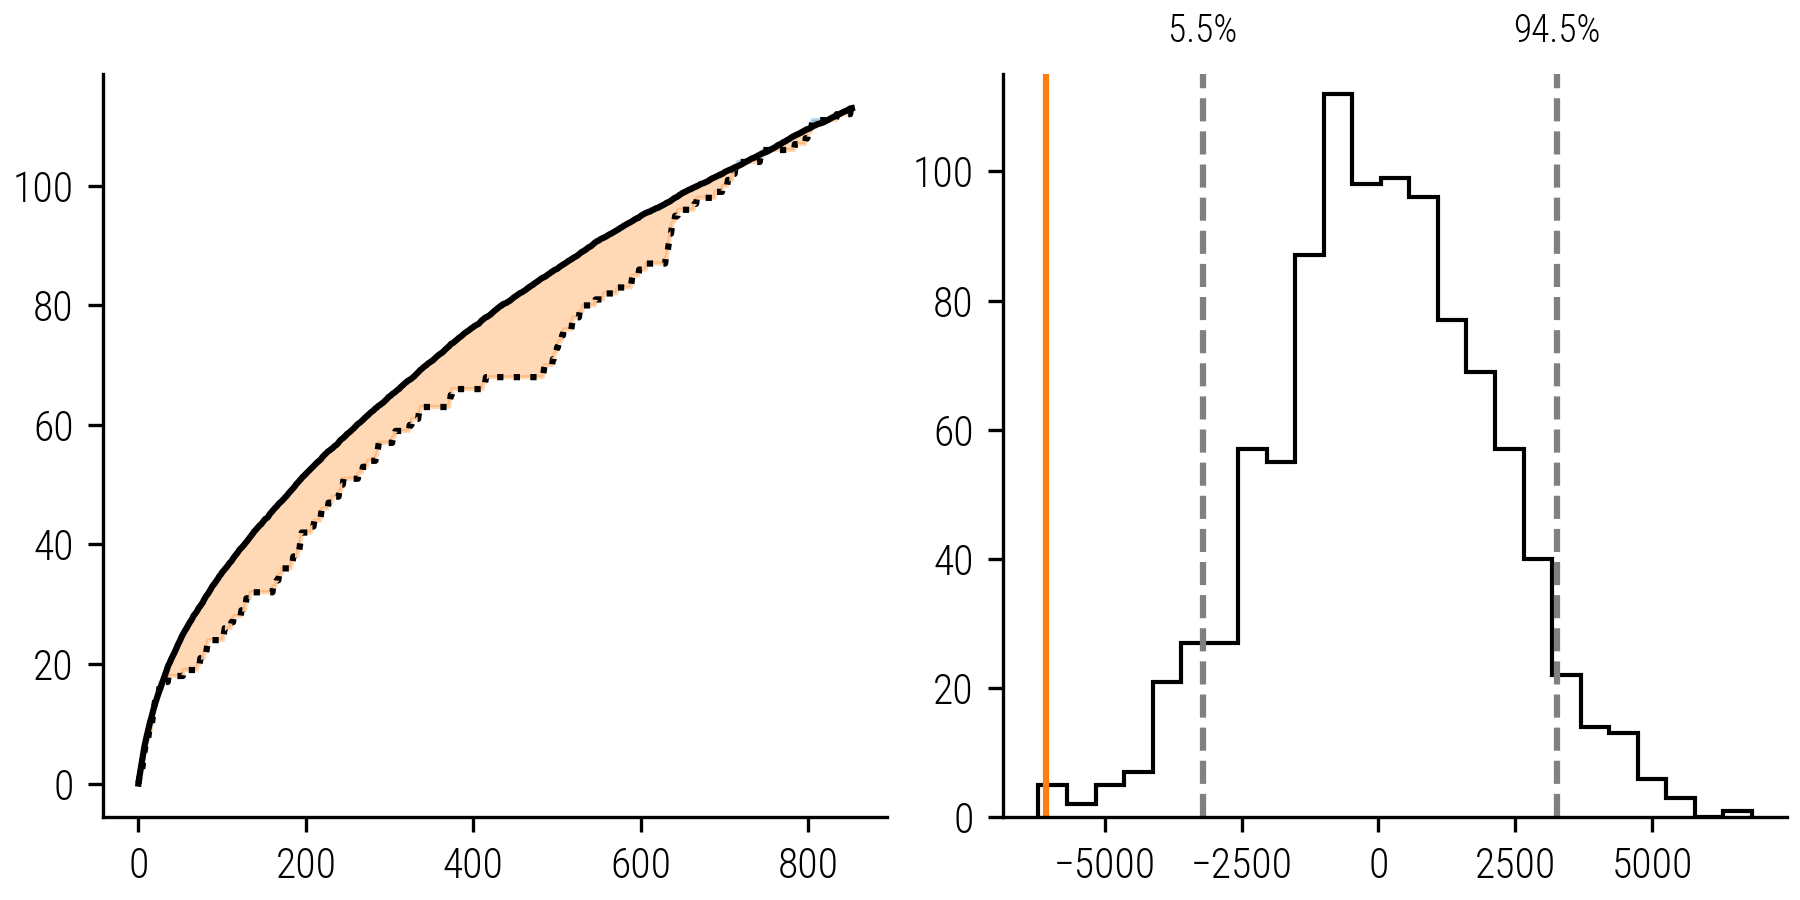 Figure 6: Left: Collector&rsquo;s curve and corresponding rarefaction curve. Right: Histogram of Bootstrapped AUC Differences: The distribution represents 1000 simulated collectors&rsquo; curves compared to the rarefaction curve. The orange vertical line marks the empirical AUC difference, with its position relative to the 89% confidence interval indicating the significance of the collector&rsquo;s bias.